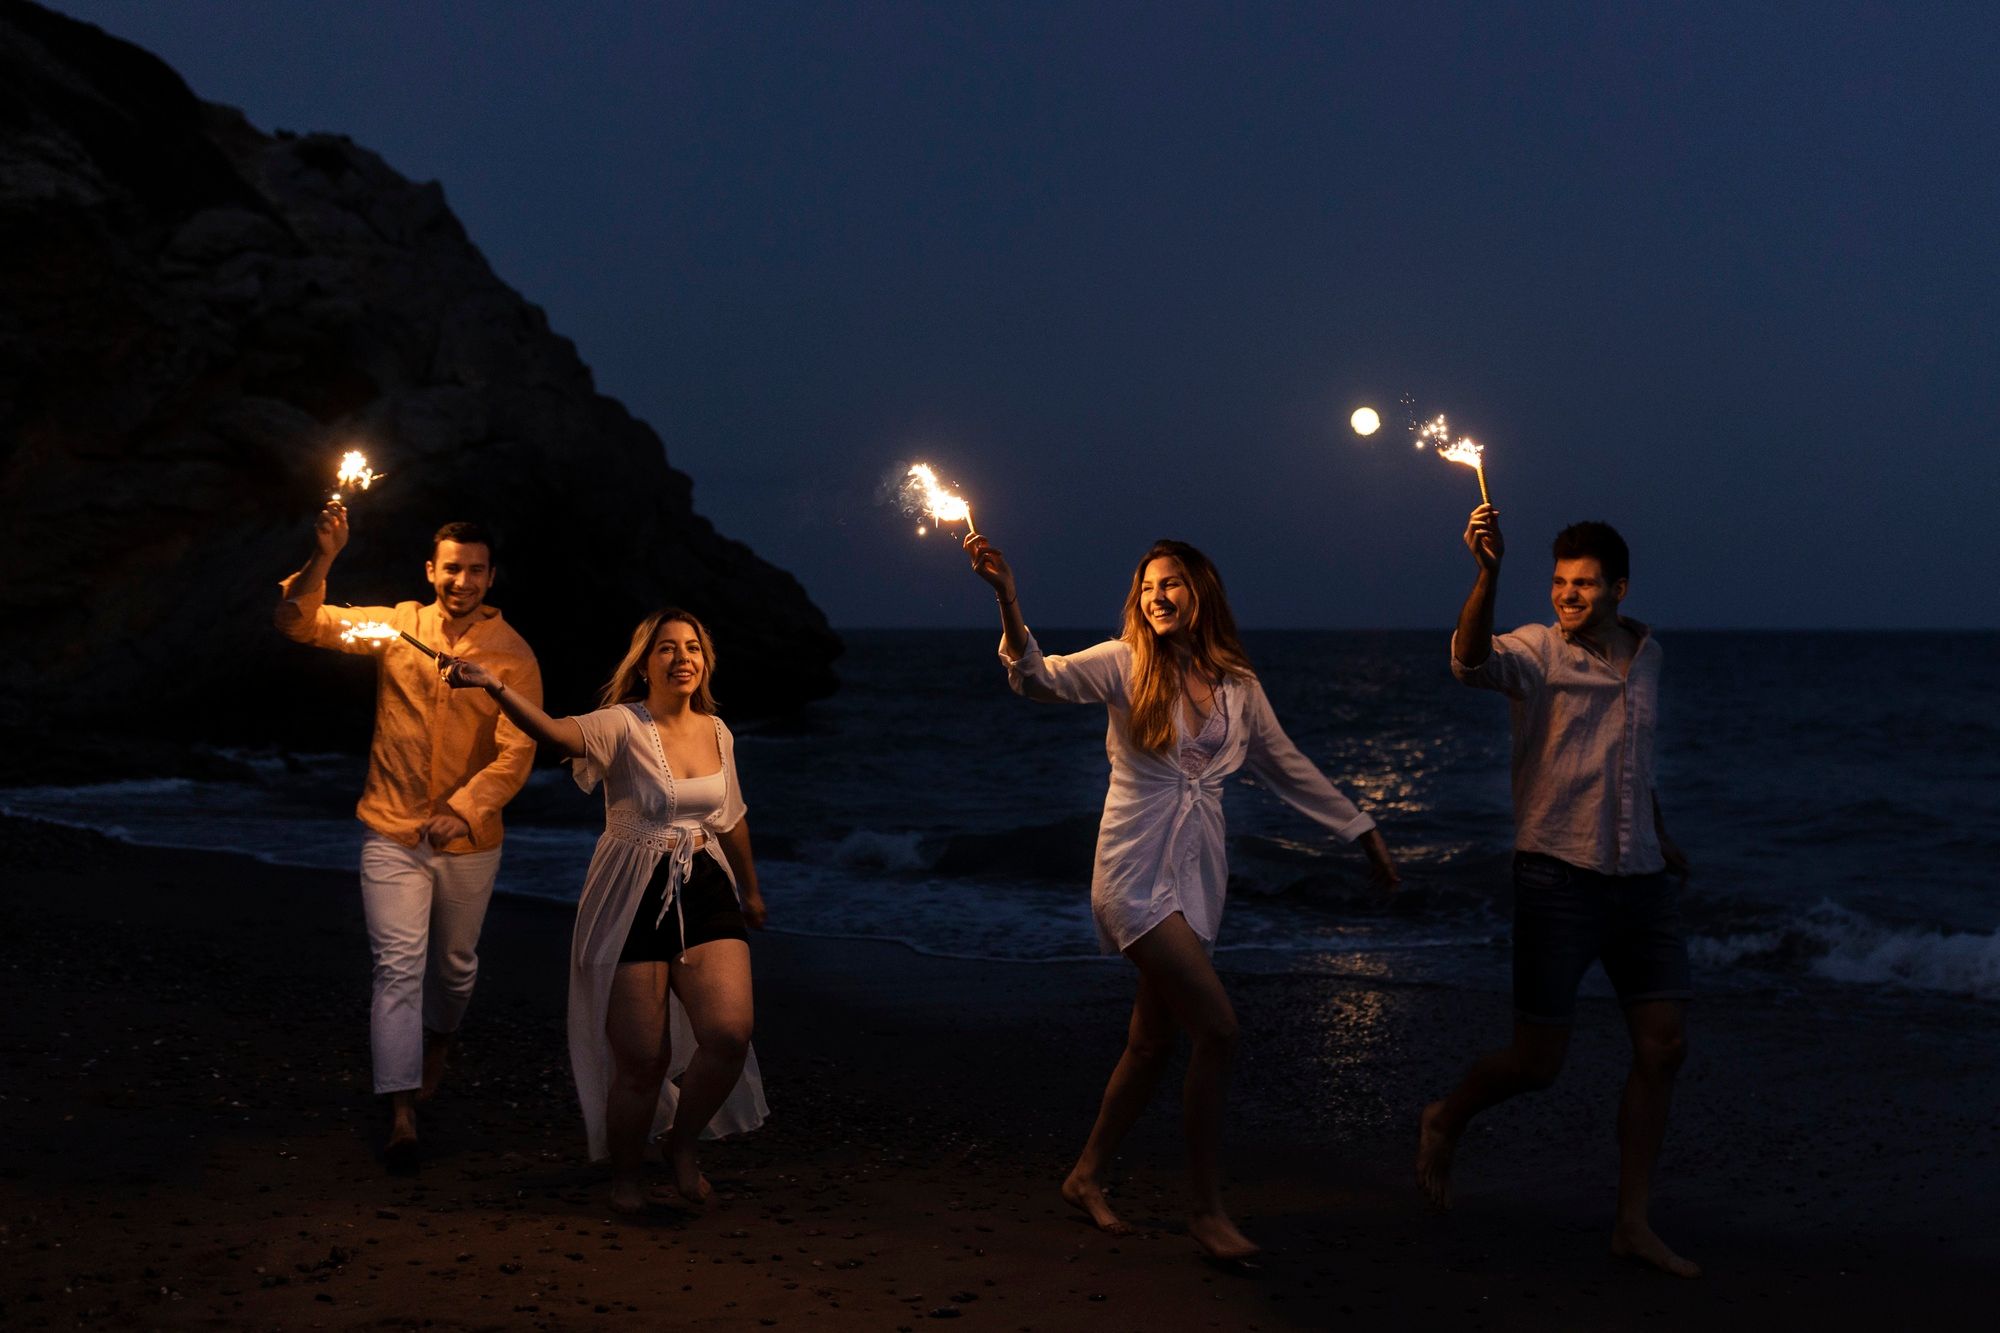 friends having fun holding torches at the beach during nightime.